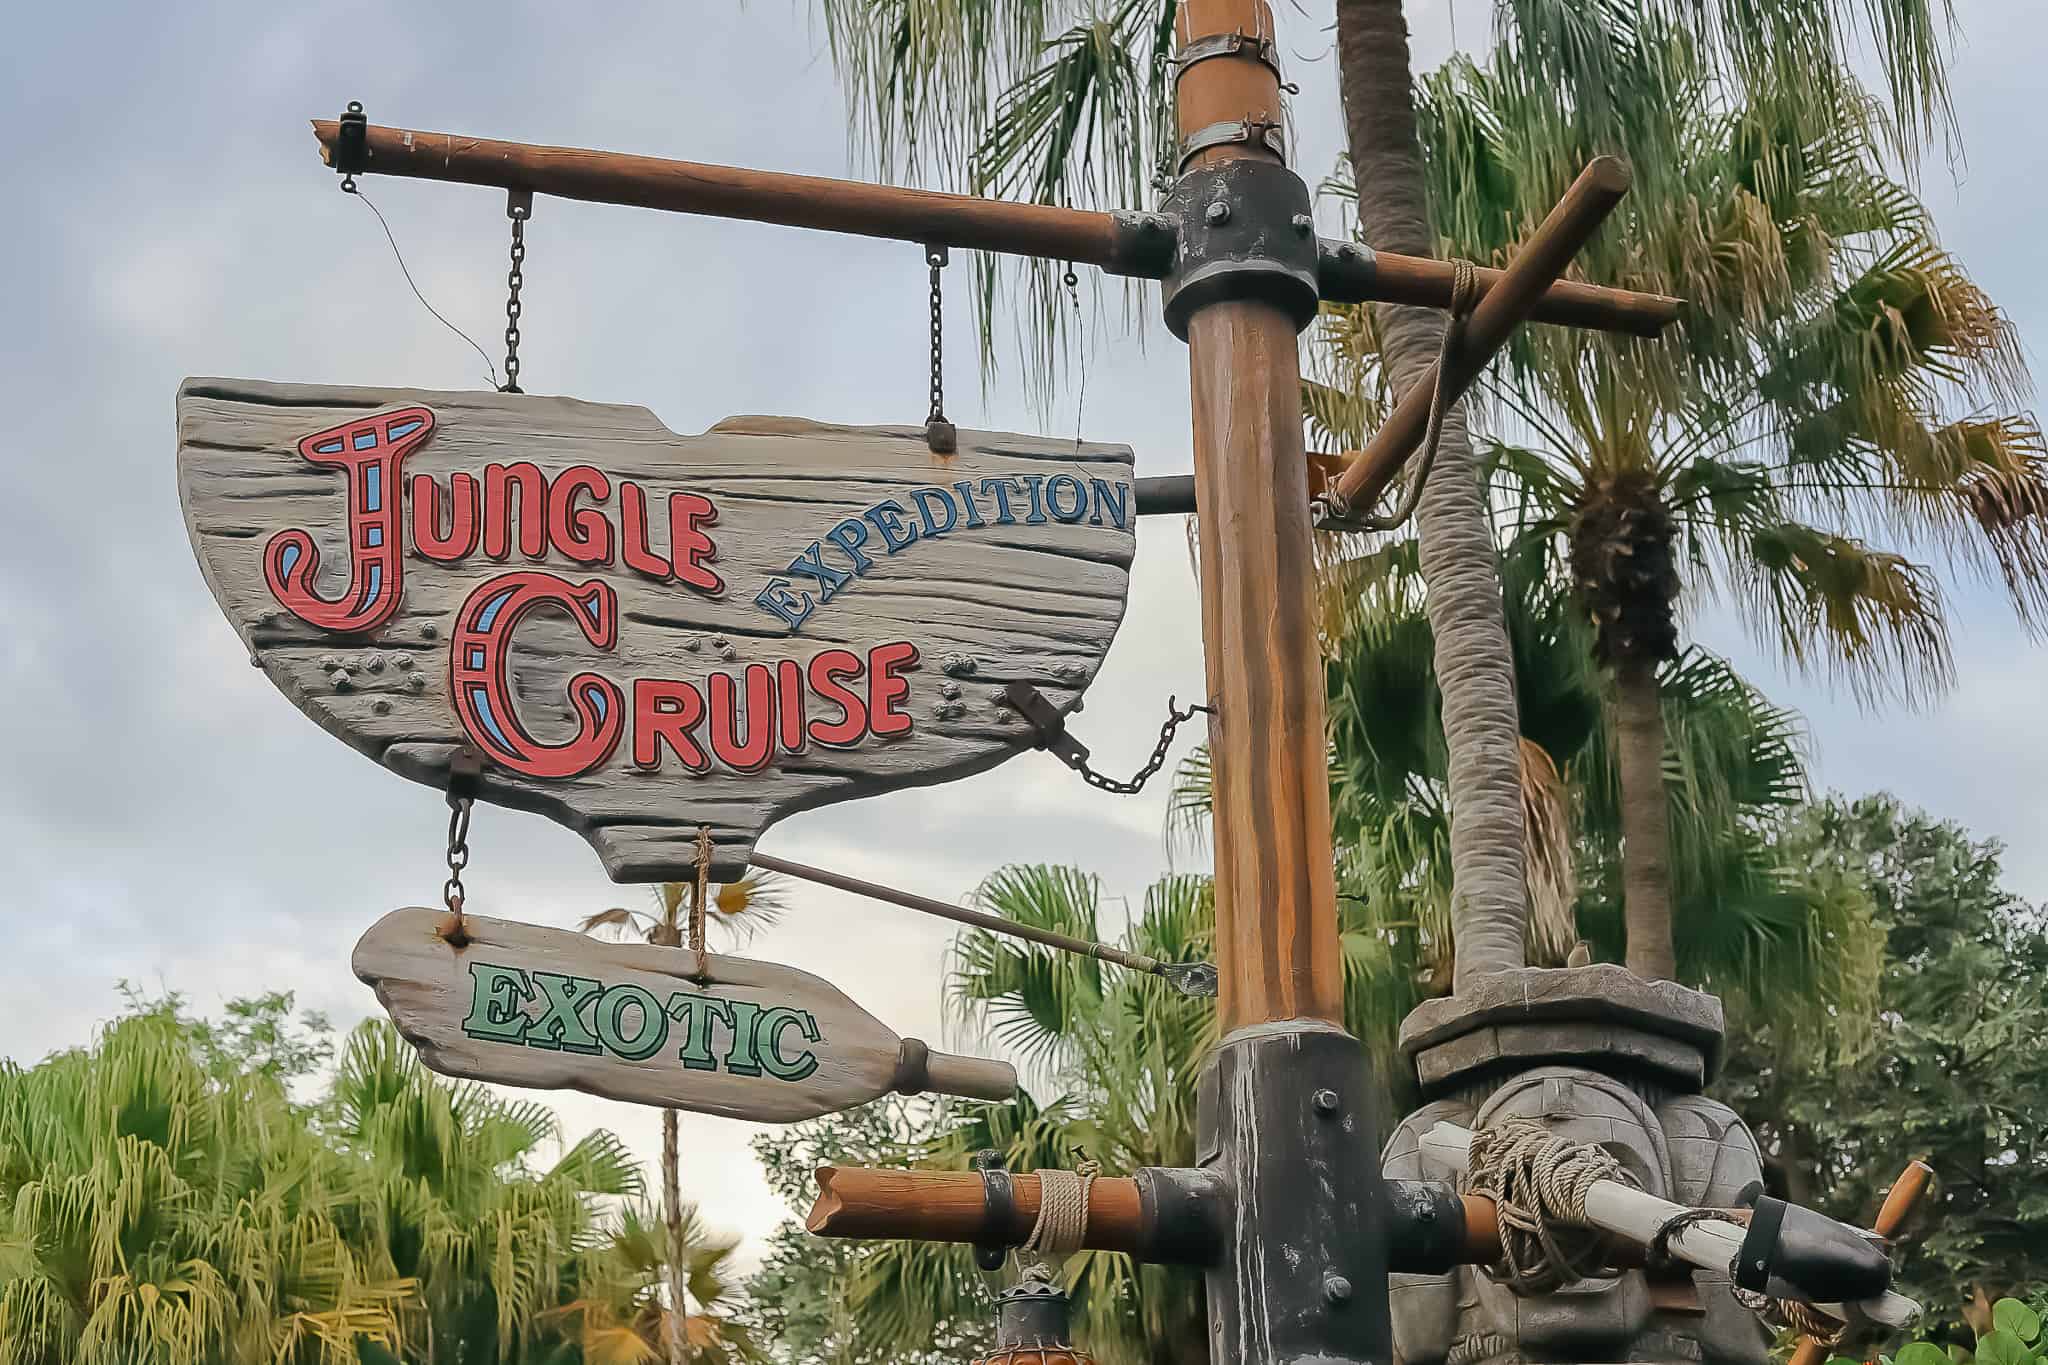 sign that sits near the entrance of Jungle Cruise that says "Jungle Cruise Exotic Expedition"